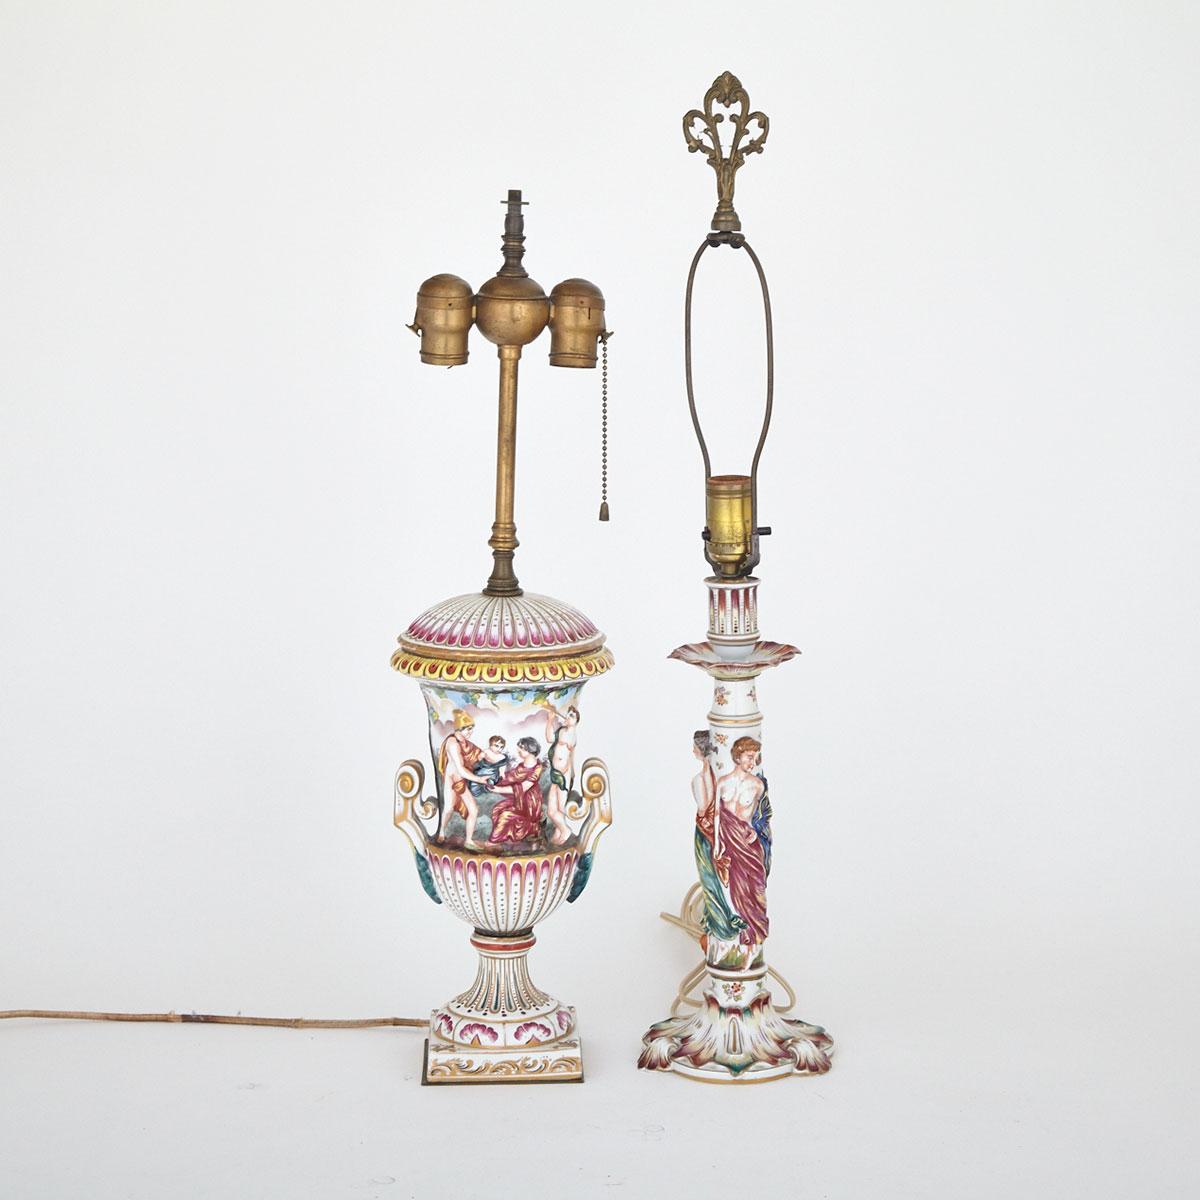 Two ‘Naples’ Porcelain Table Lamps, early 20th century